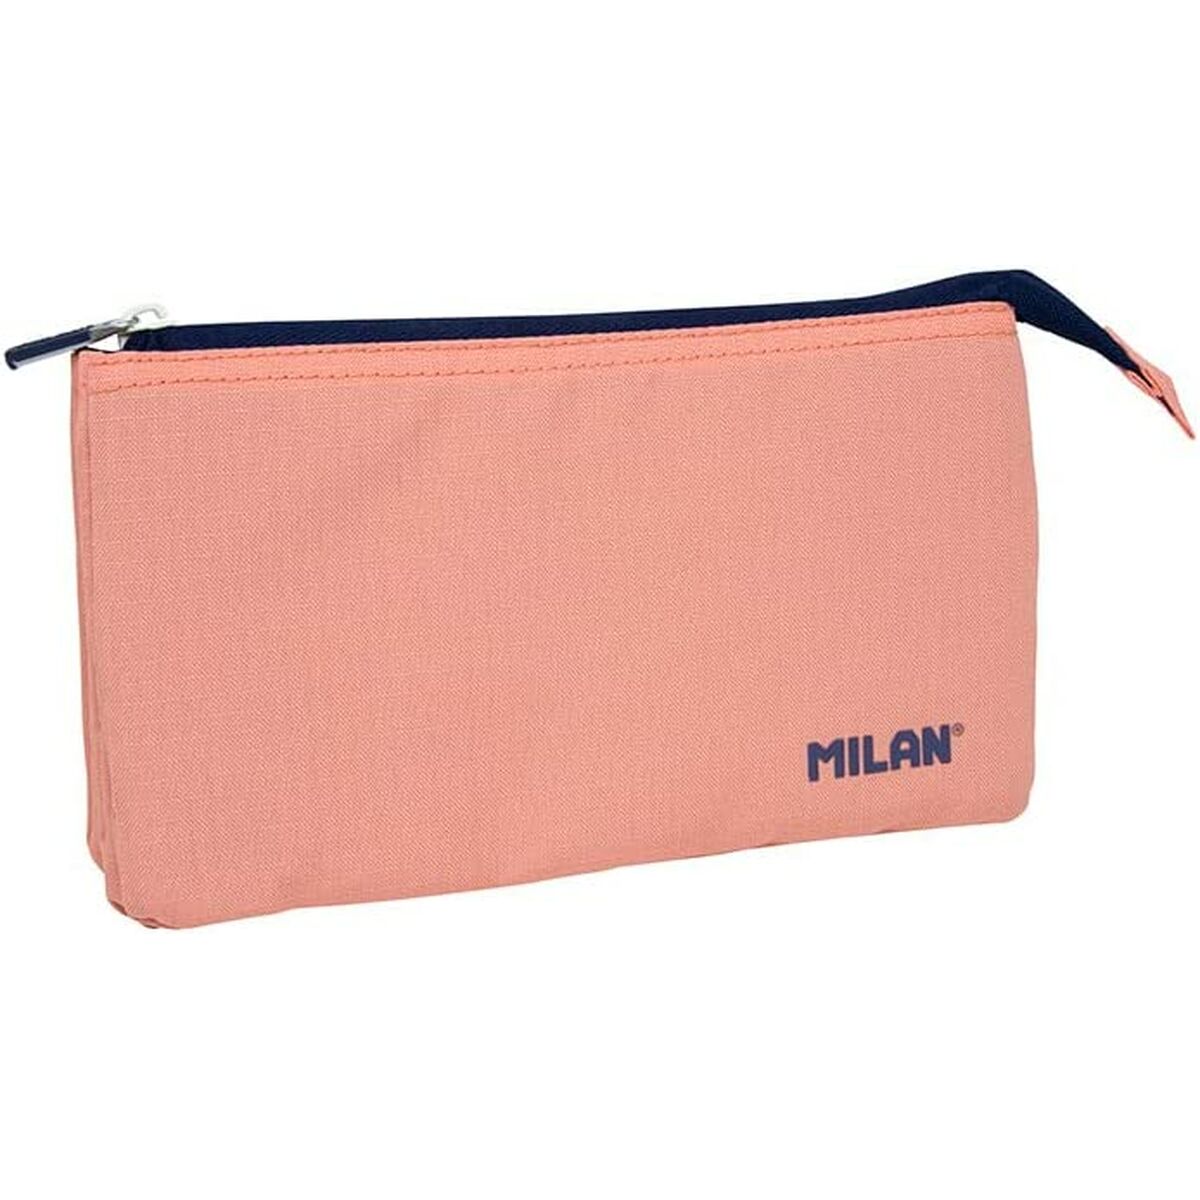 Holdall Milan 1918 Salmon 5 compartments (22 x 12 x 4 cm)